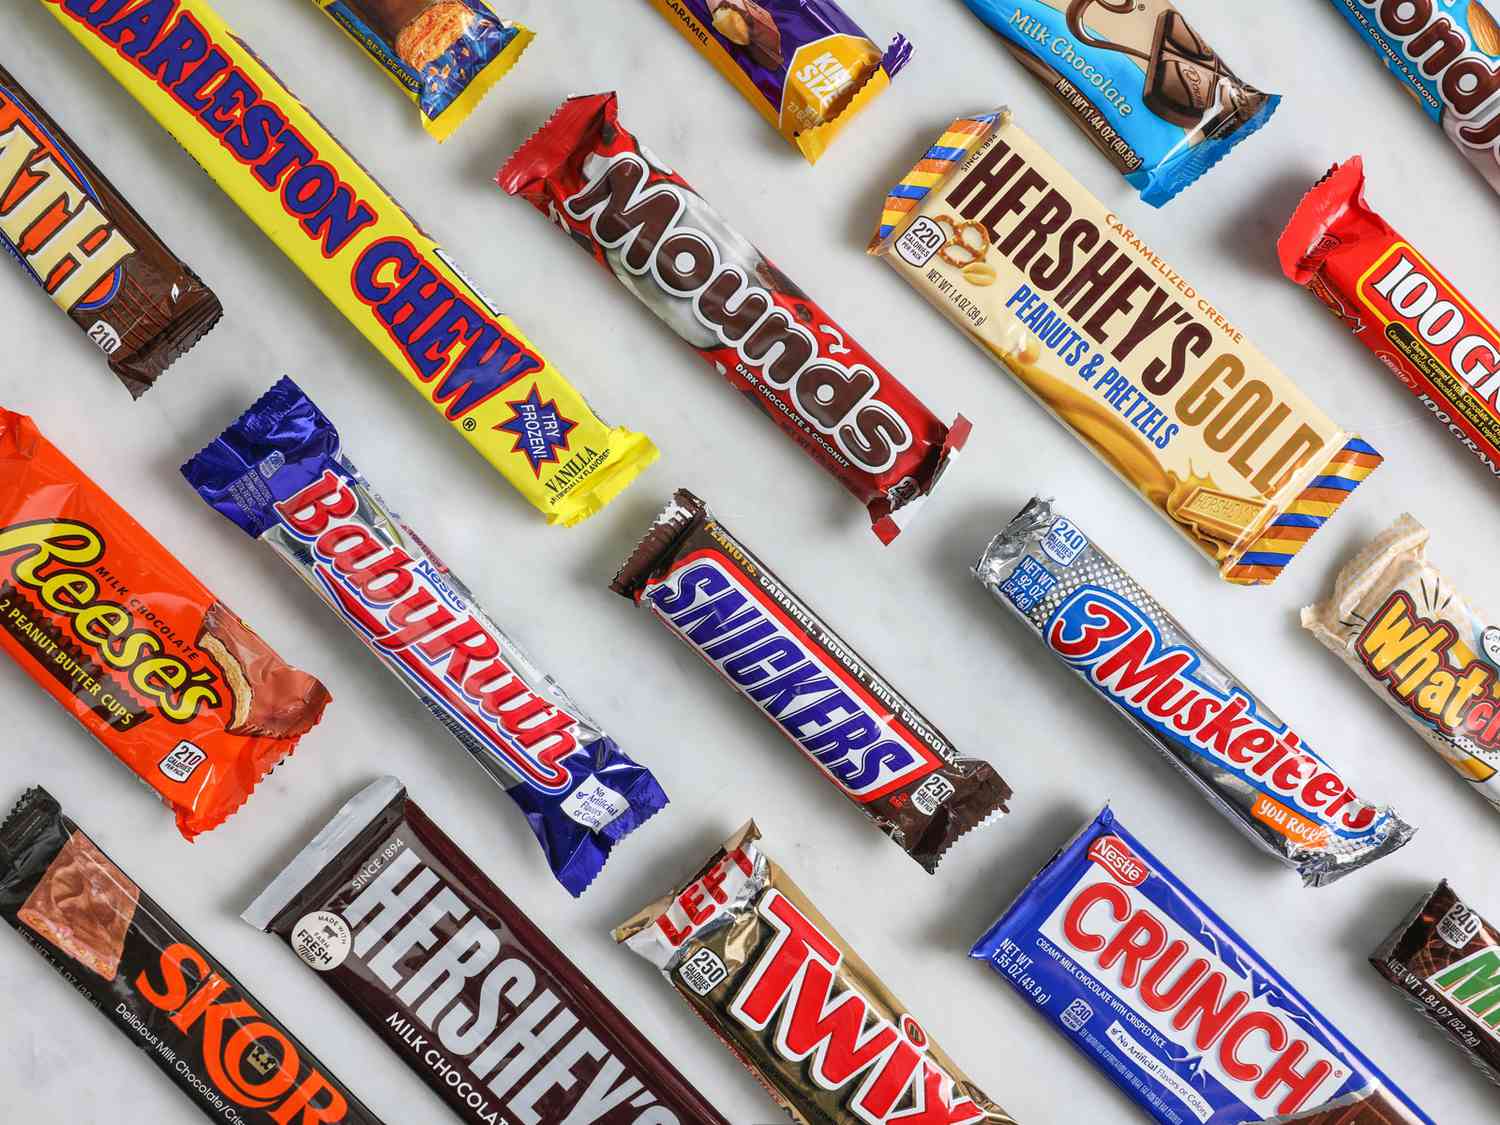 They Don’t Make Them Like They Used To - types of chocolate bars - Tha 210 Arleston Chew Milk Chocolate Reese's 2 Peanut Butter Cups Tut 1.1.07 30 210 Rence Mesport Baby Ruth Real Deanu Fresh Skor Delicious Milk ChocolateCrist Milk Chocola Hershey'S Rozen